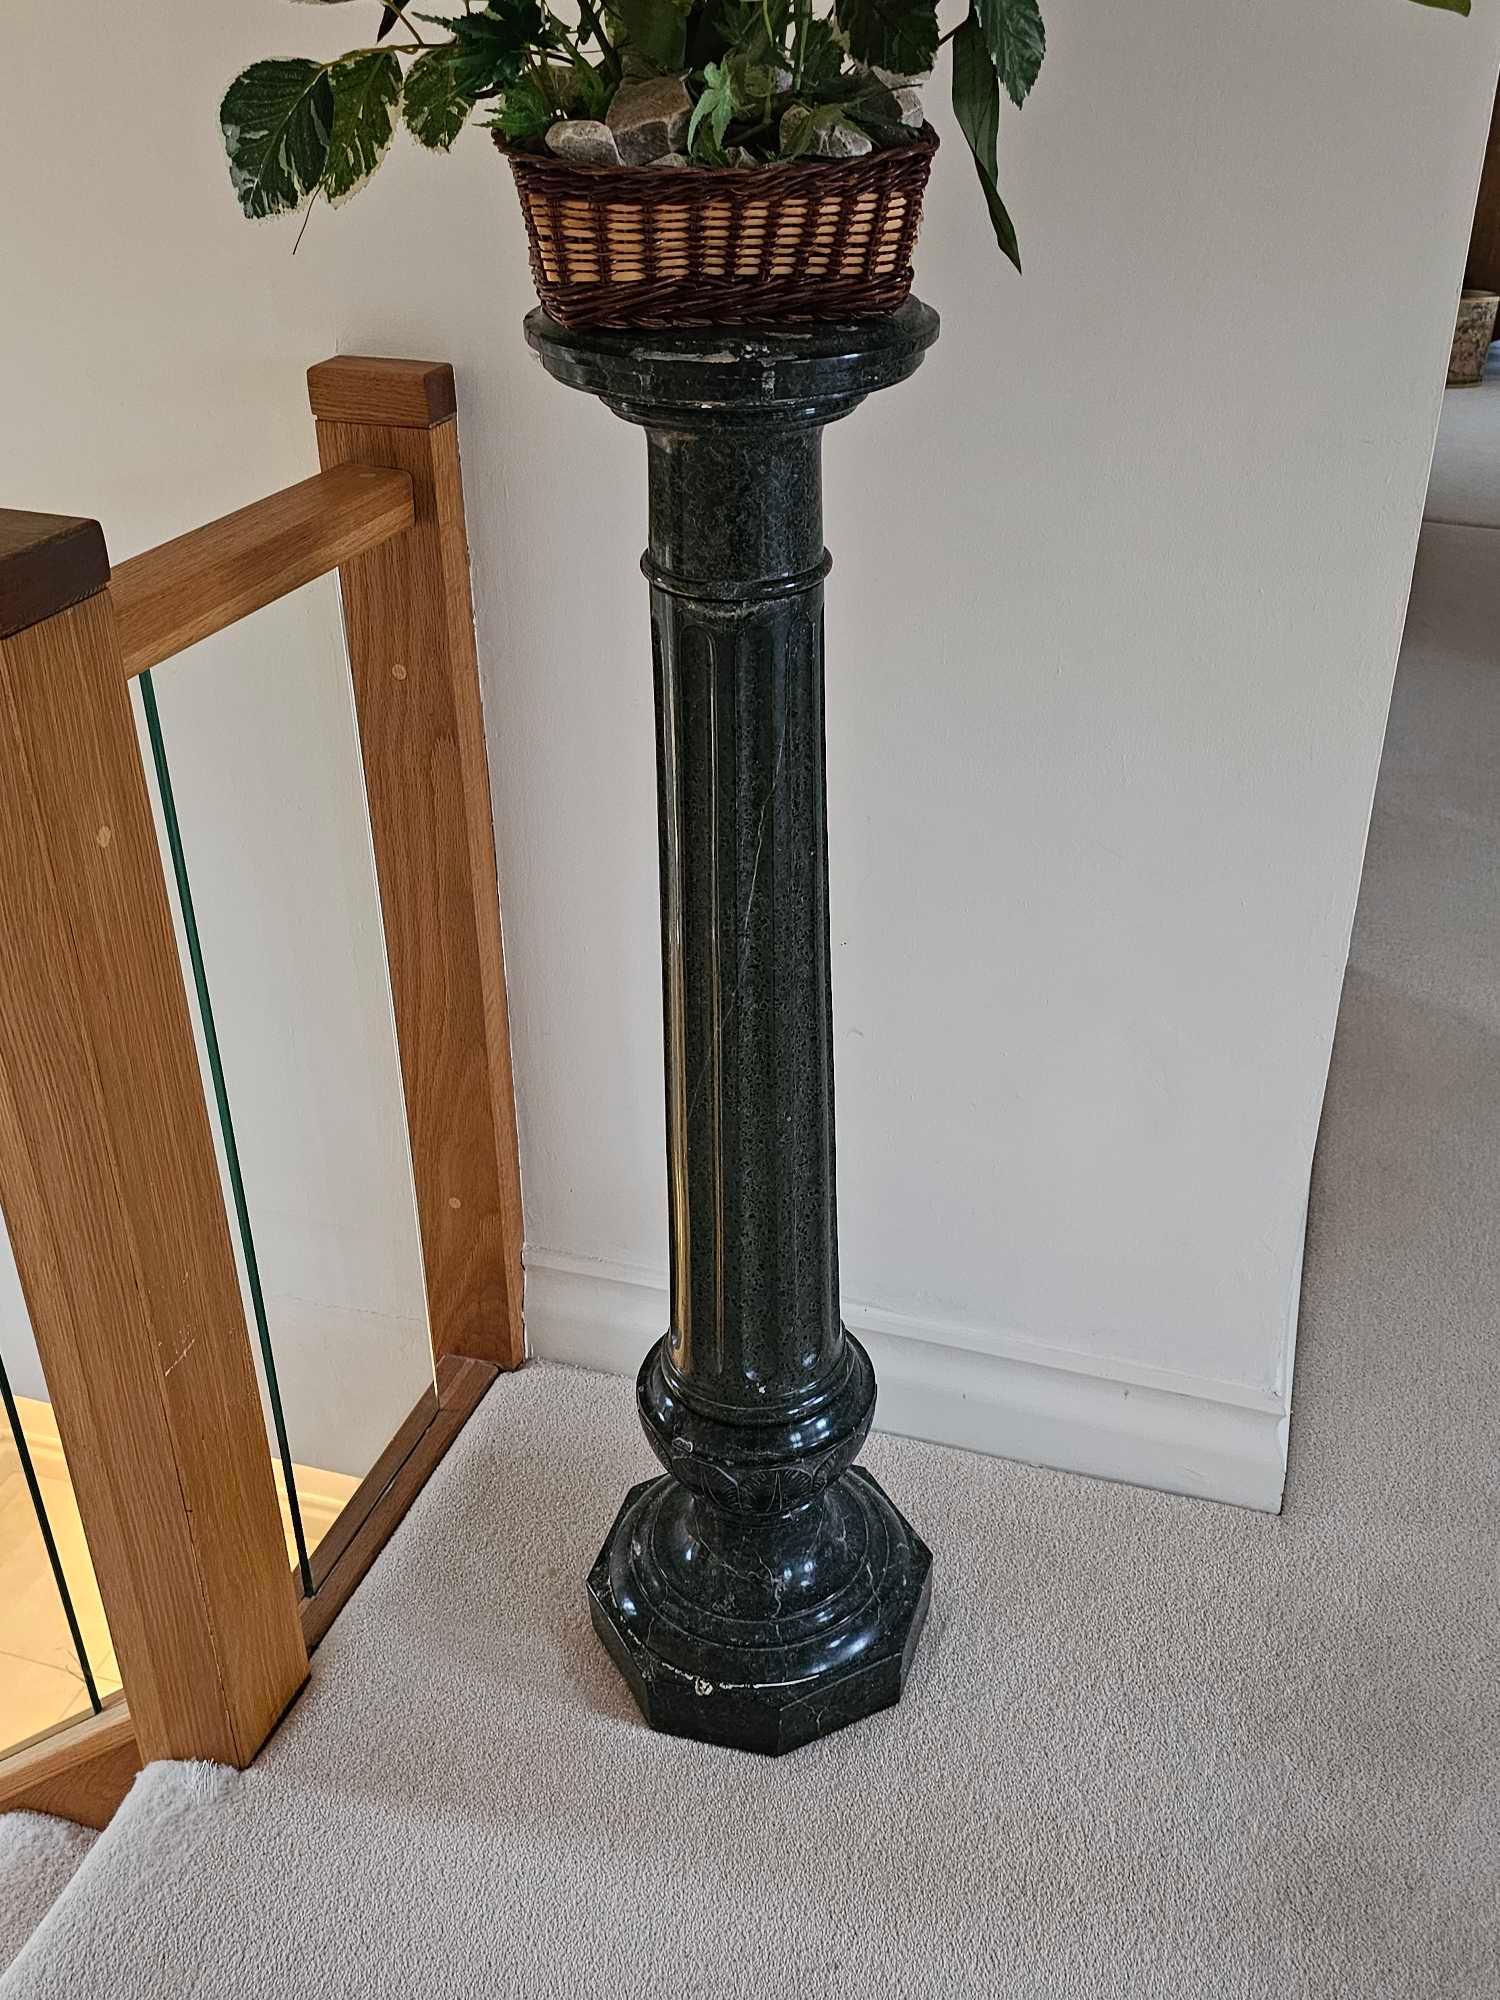 French Neoclassical Style Marble Pedestal Column The Circular Top On The Fluted Tapered Column And - Image 2 of 3